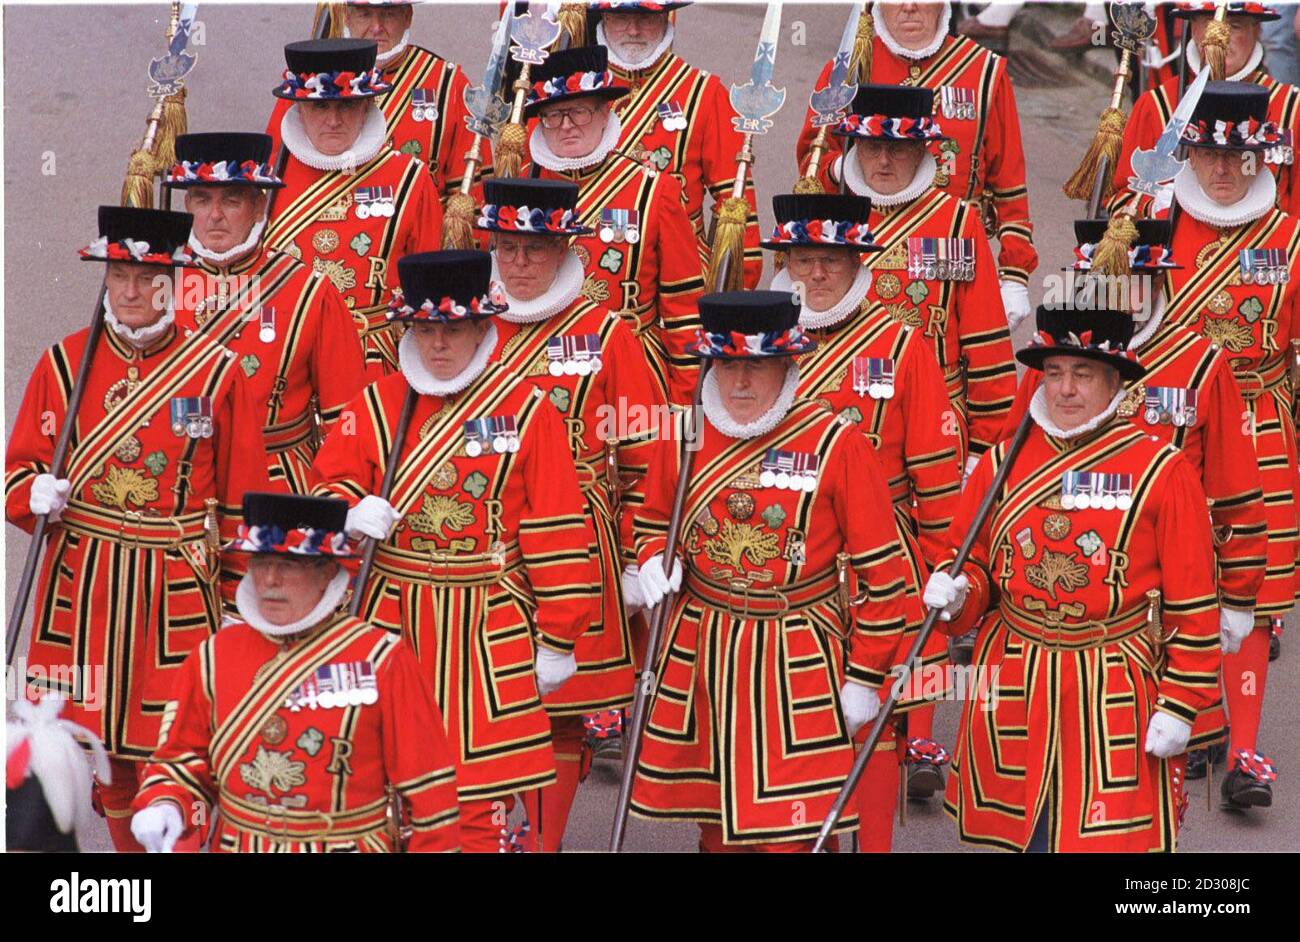 14-06-99 THE MOST NOBLE ORDER OF THE GARTER CEREMONY HELD AT WINDSOR CASTLE. A DETACHMENT OF THE QUEENS BODY GUARD OF THE YEOMAN OF THE GUARD FORM THE END OF THE PROCESSION AT THE GARTER CEREMONY. PIC SIMON BROOKE-WEBB. Stock Photo